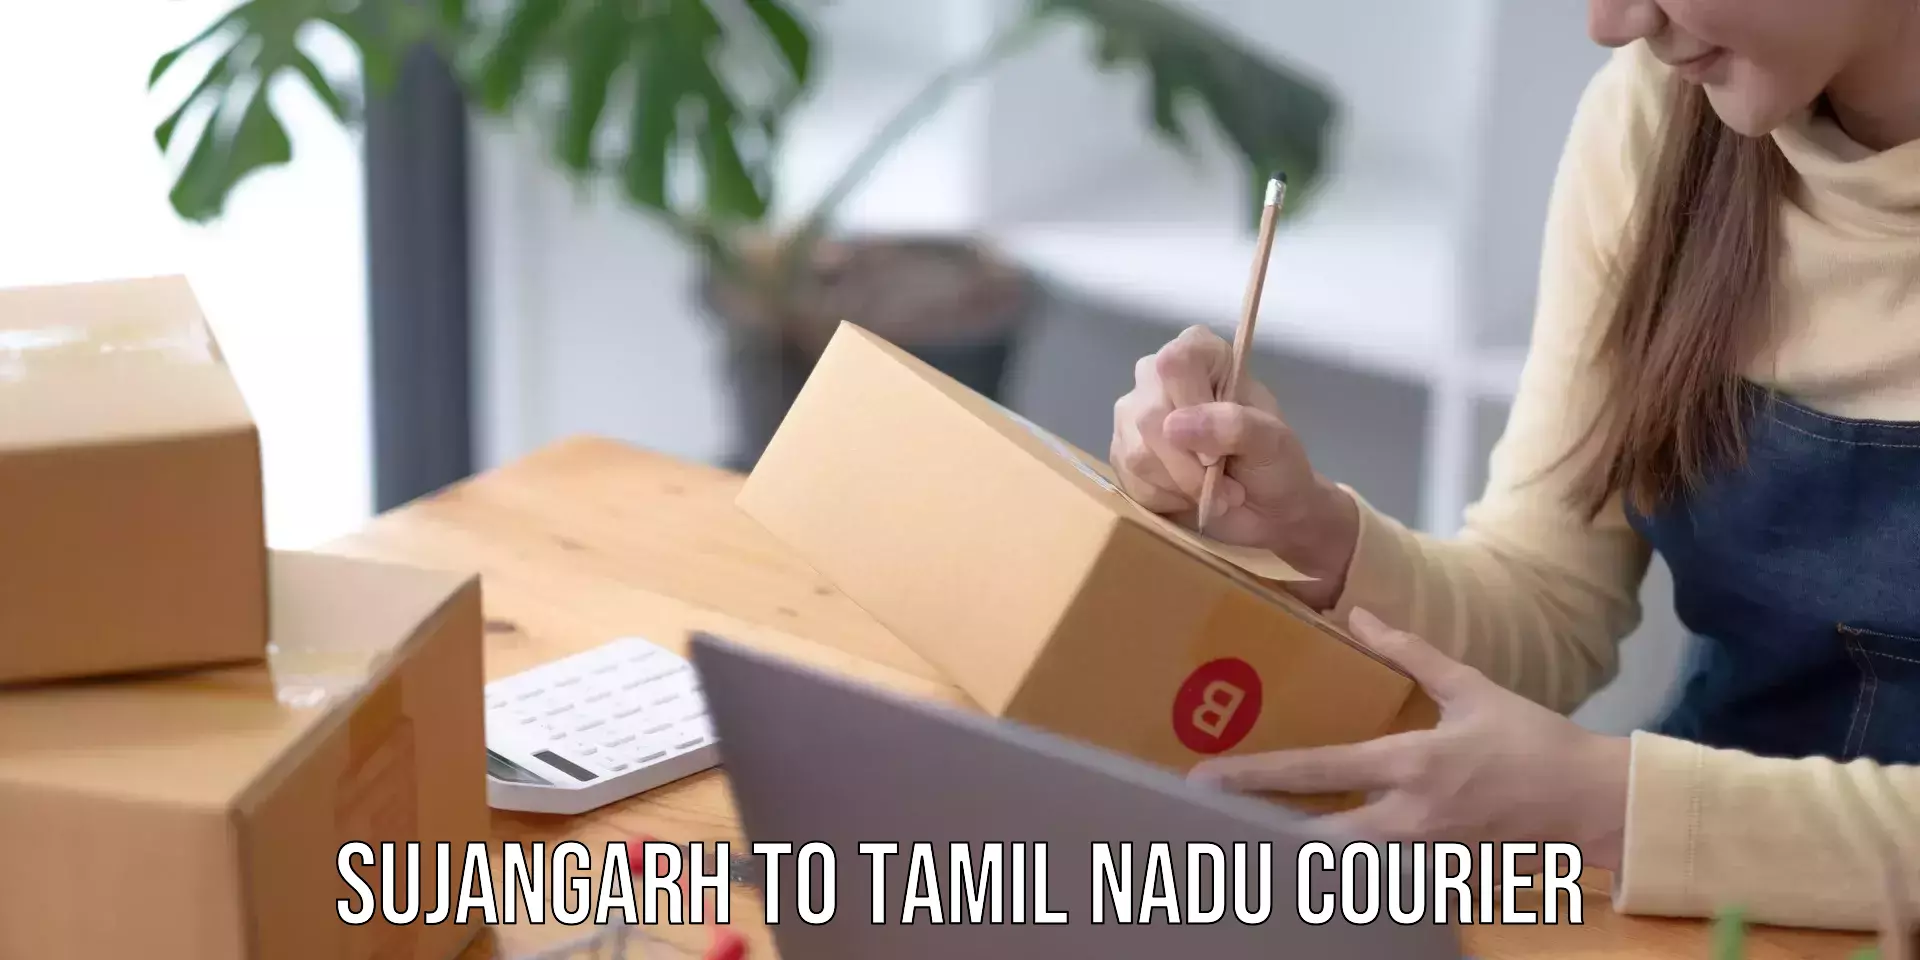 User-friendly delivery service Sujangarh to Thisayanvilai